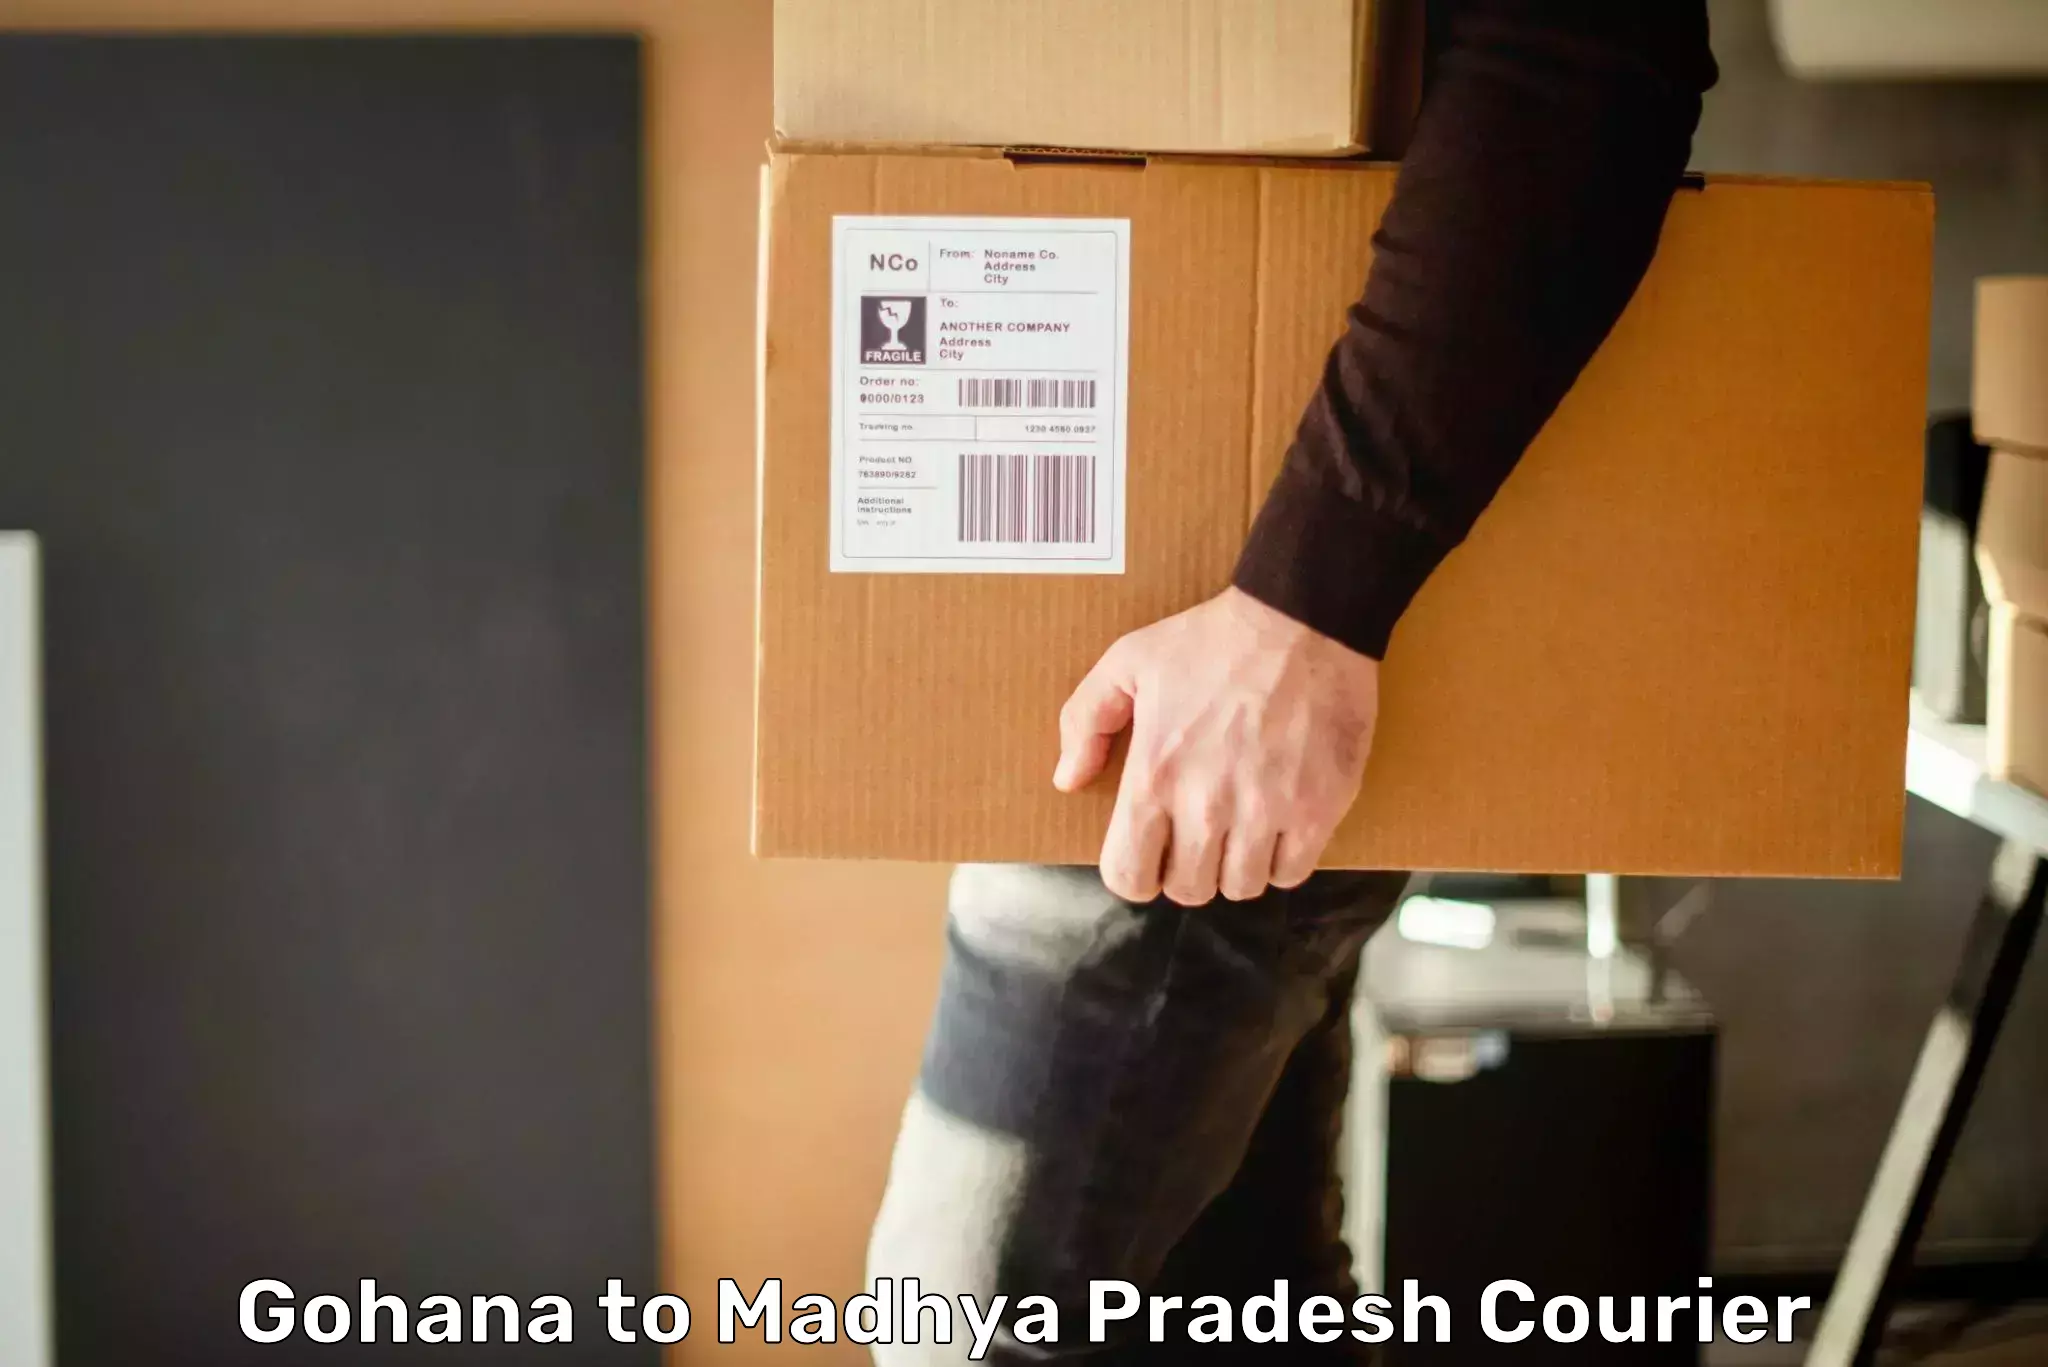 Courier service booking in Gohana to Chhatarpur